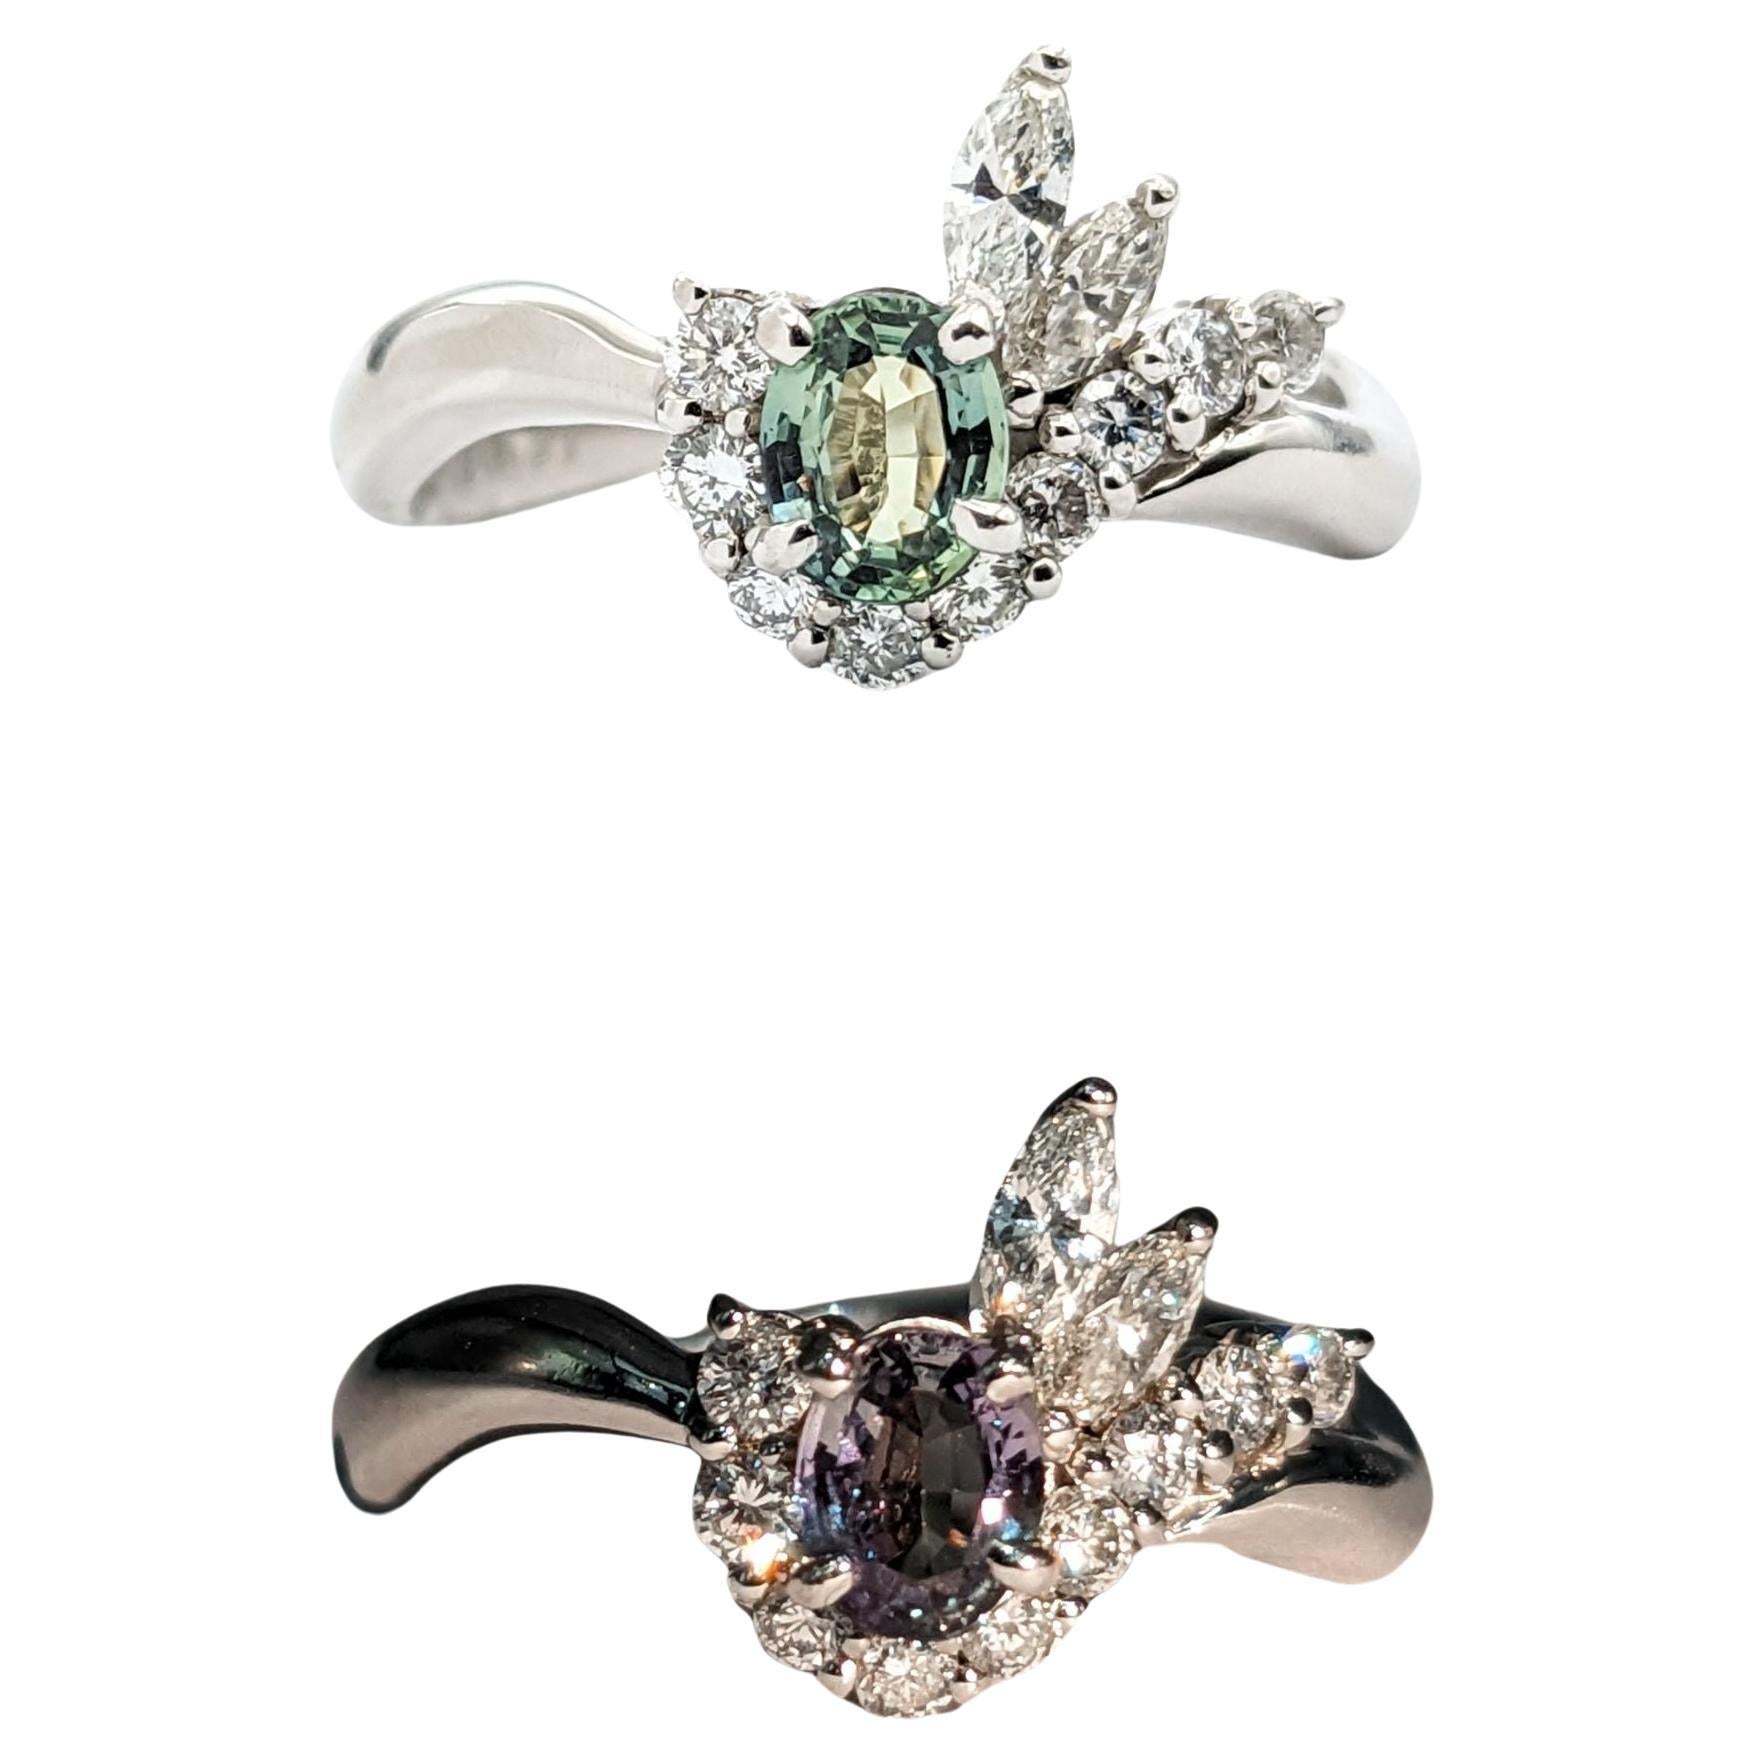 What colors does alexandrite change?